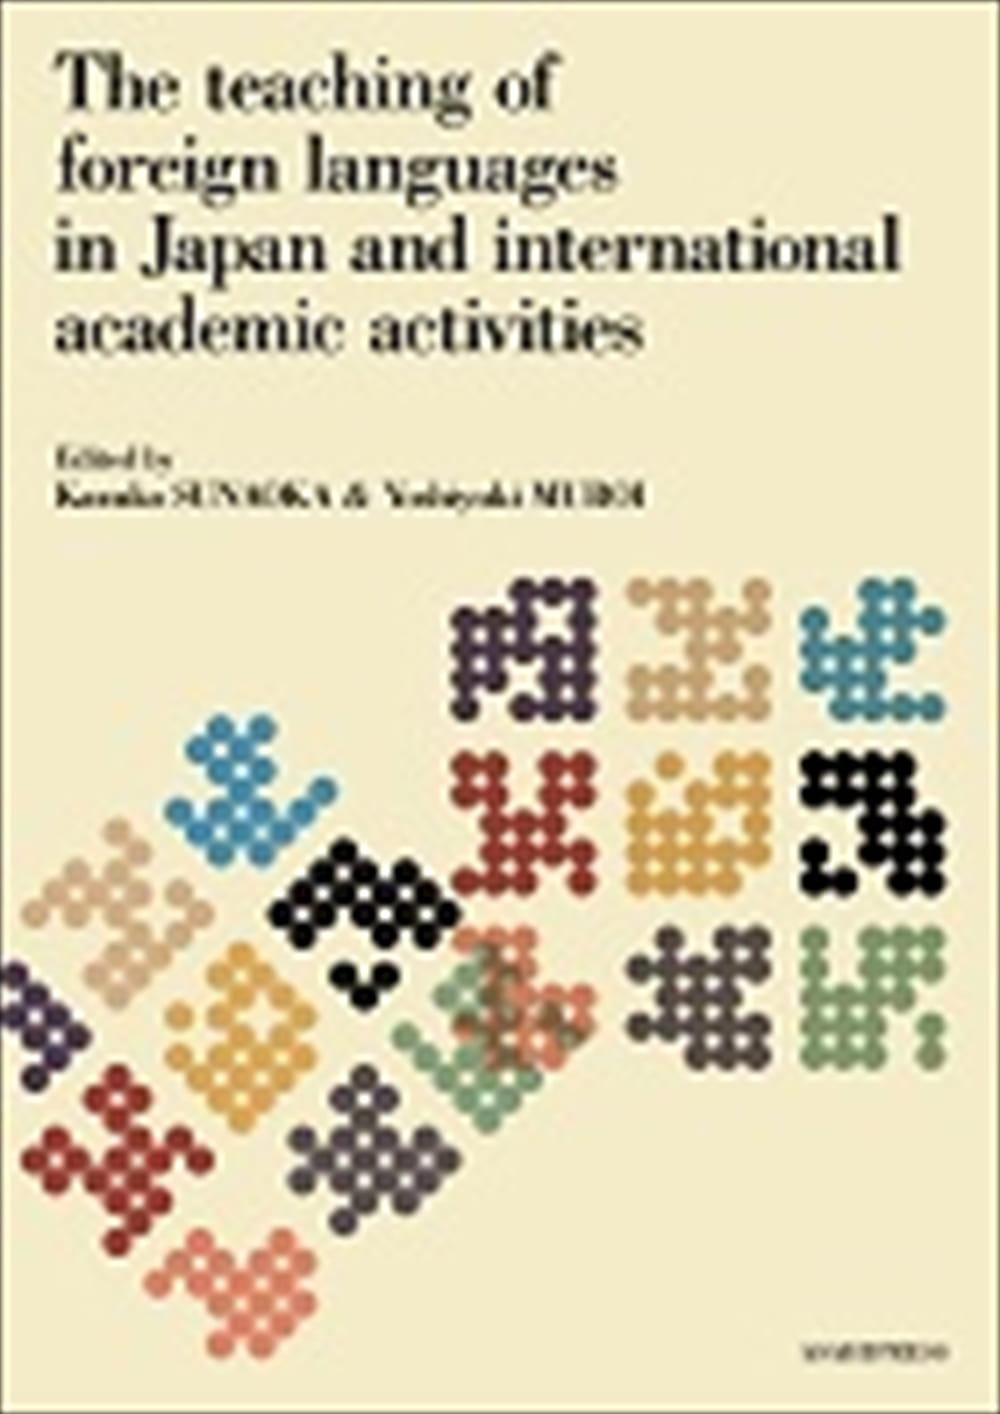 The teaching of foreign languages in Japan and international academic activities